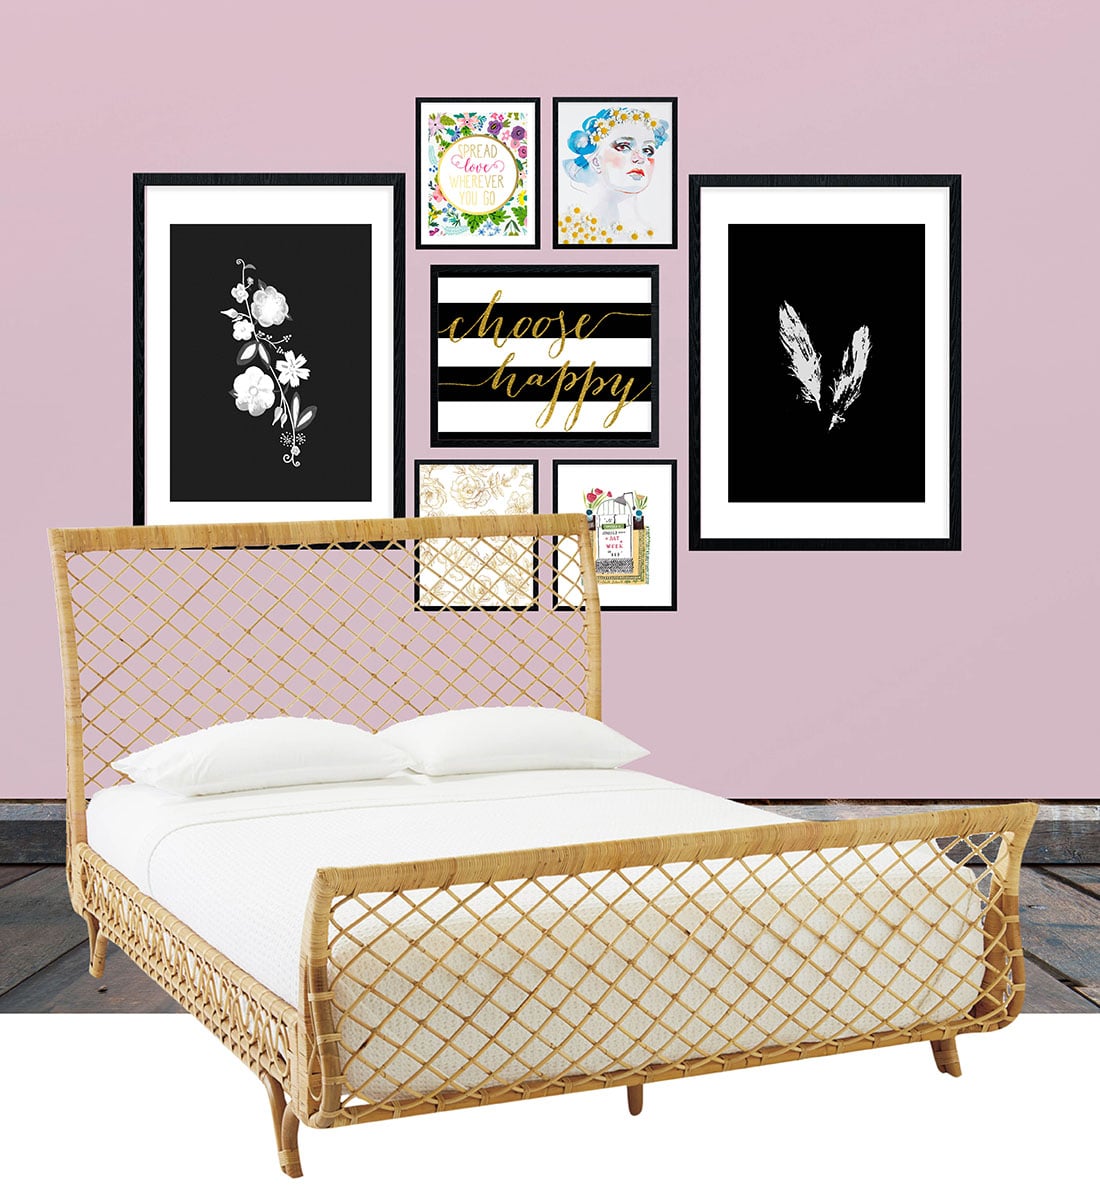 Frame Game • Boho Glam Gallery Walls • Frame Game is an occasional series in which I take readers' gallery wall requests and find art that fits their personalities • Little Gold Pixel